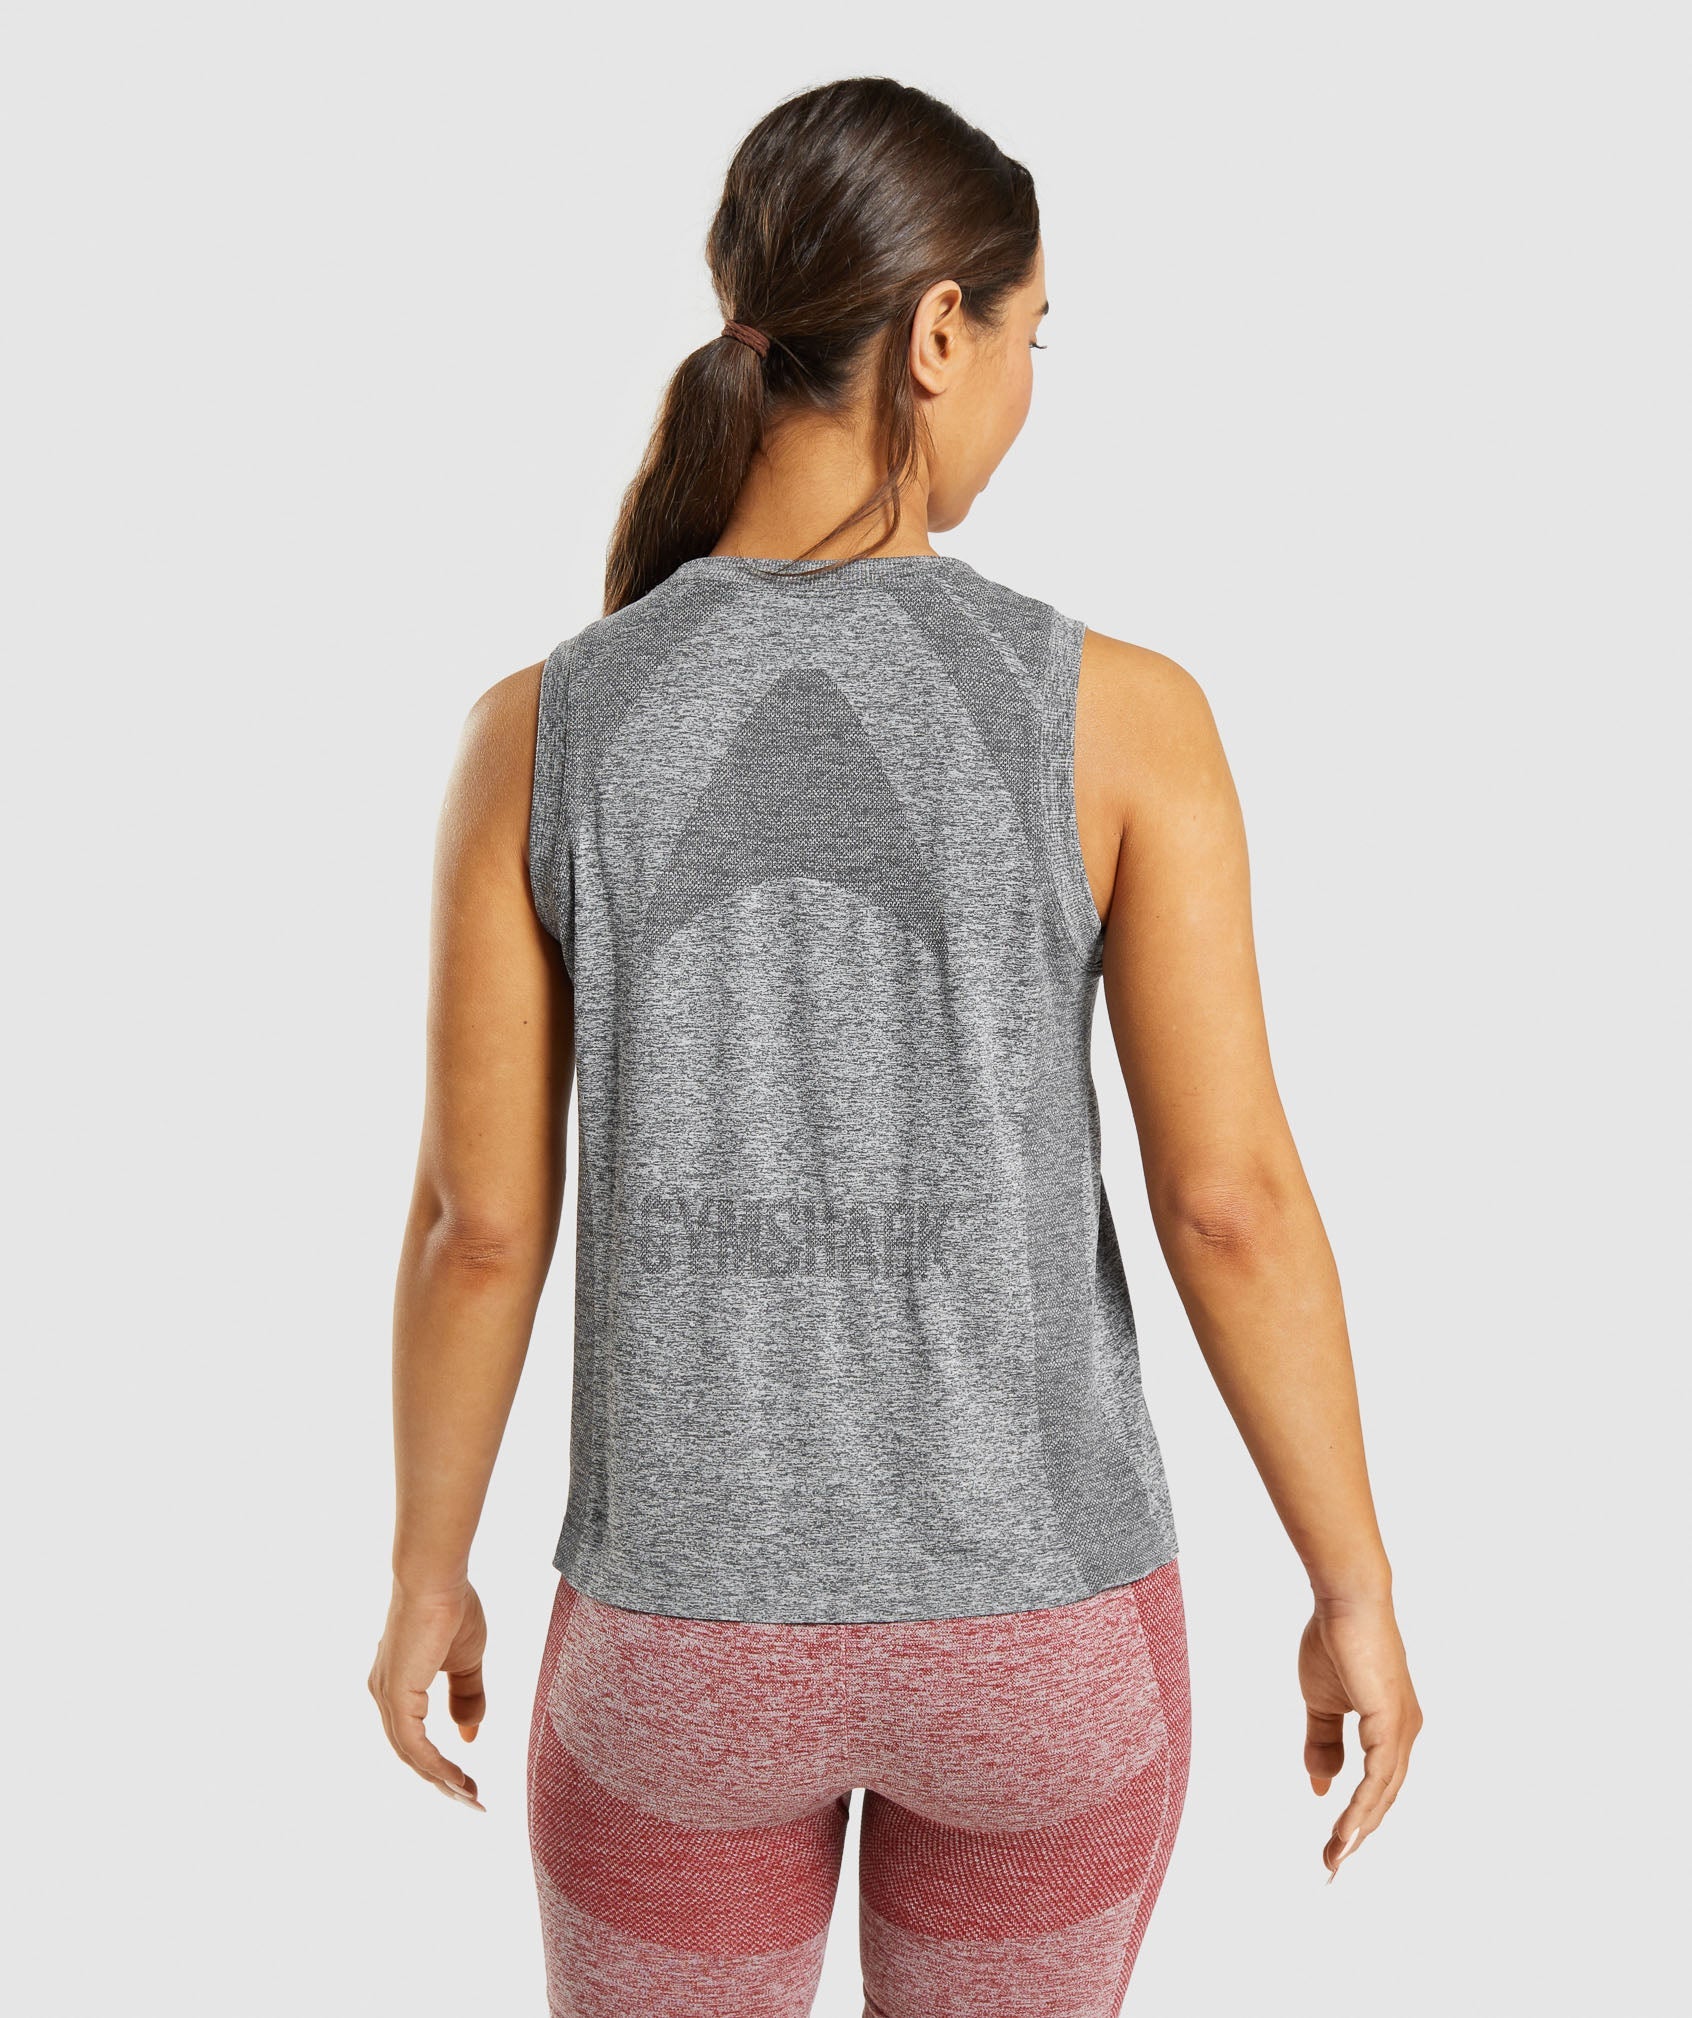 Flex Loose Tank Top in Charcoal Grey Marl - view 2